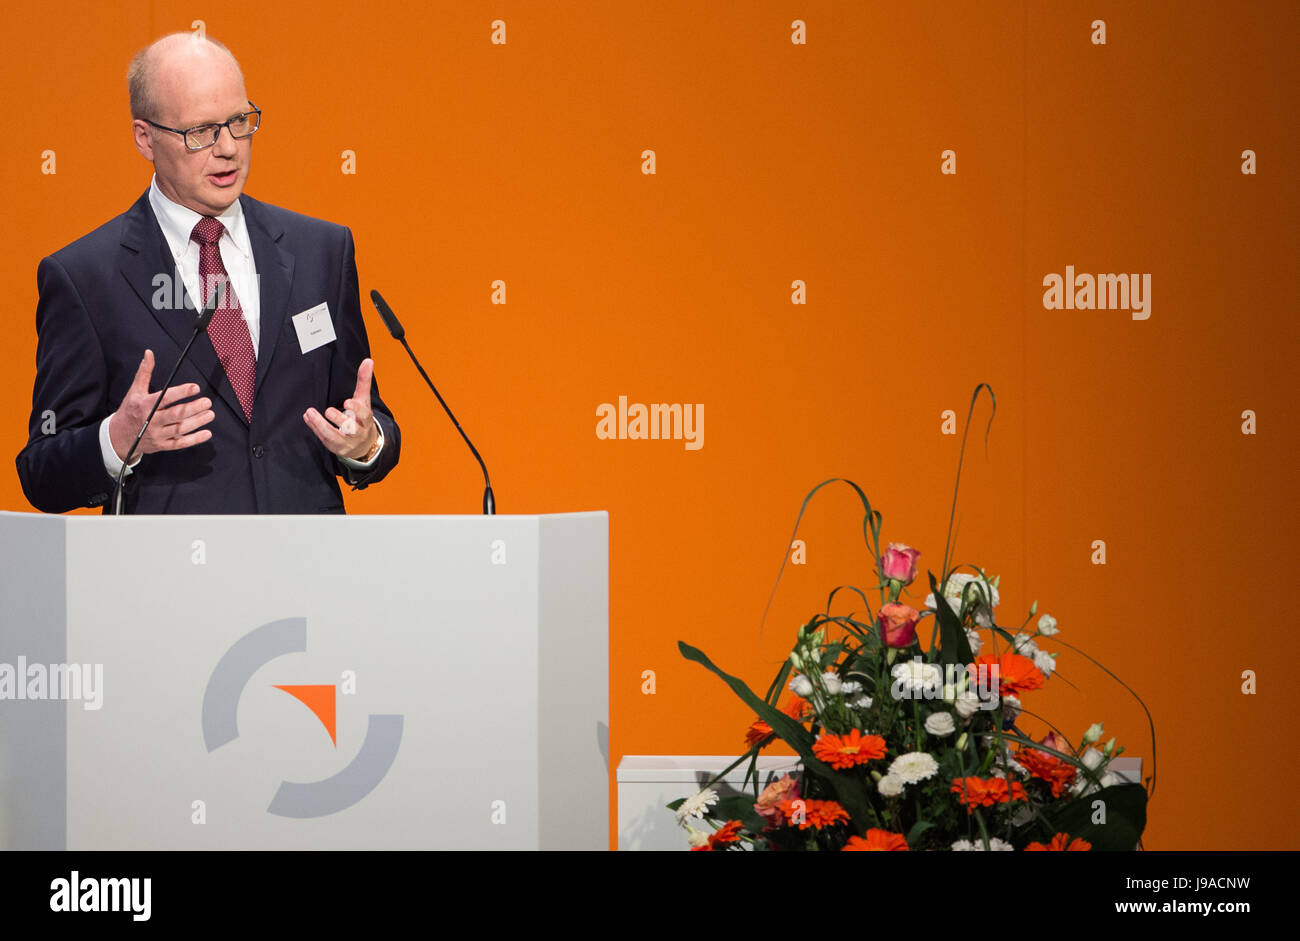 Braunschweig, Germany. 1st June, 2017. Heinz Joerg Fuhrmann, CEO of Salzgitter AG, speaking to shareholders at the general meeting of Salzgitter AG in Braunschweig, Germany, 1 June 2017. Photo: Silas Stein/dpa/Alamy Live News Stock Photo